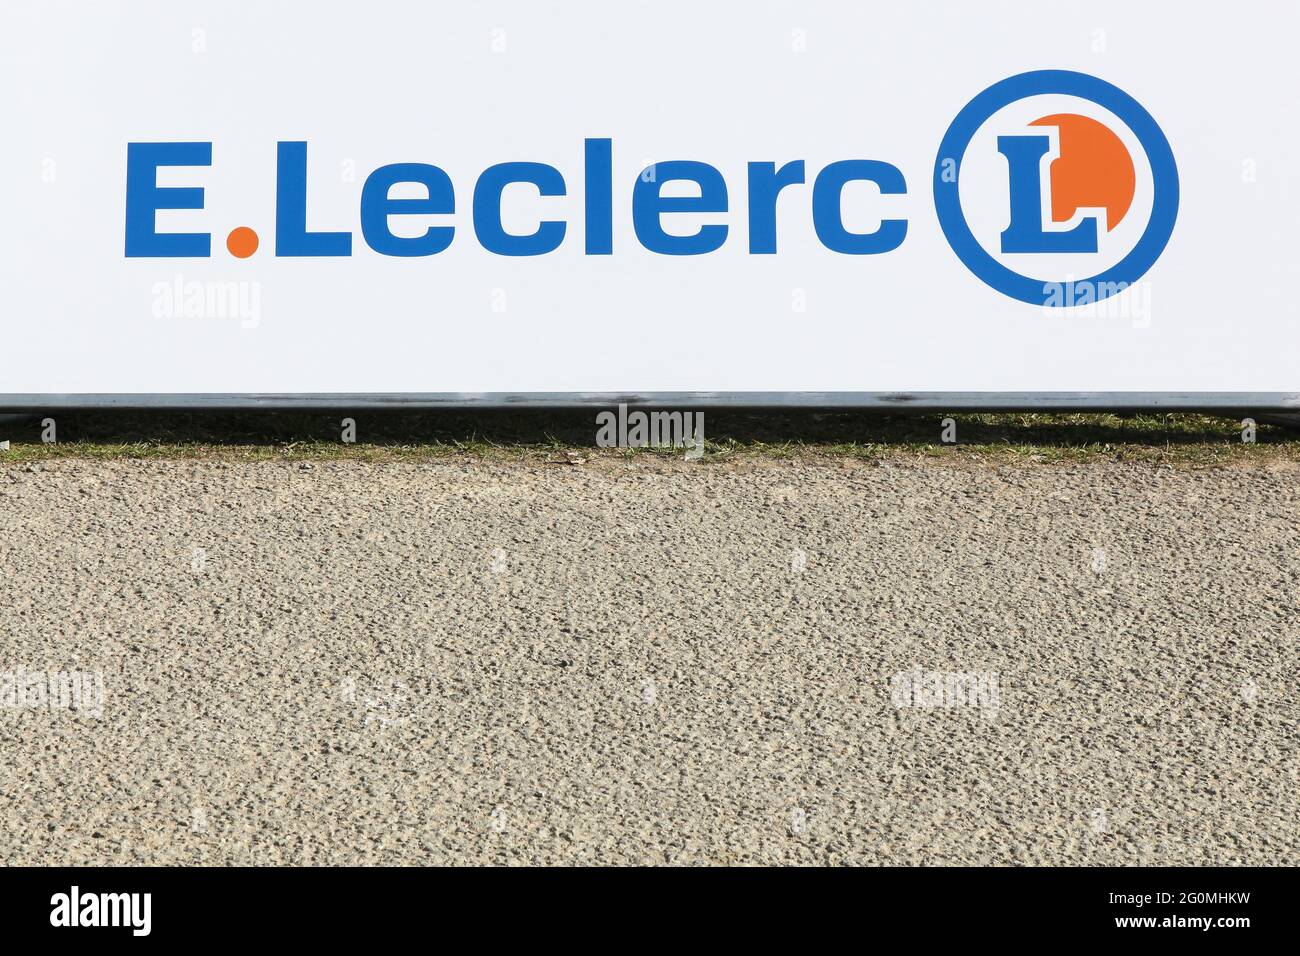 Odenas, France - March 10, 2020: Leclerc logo on a panel. Leclerc is a french hypermarket and supermarket chain Stock Photo